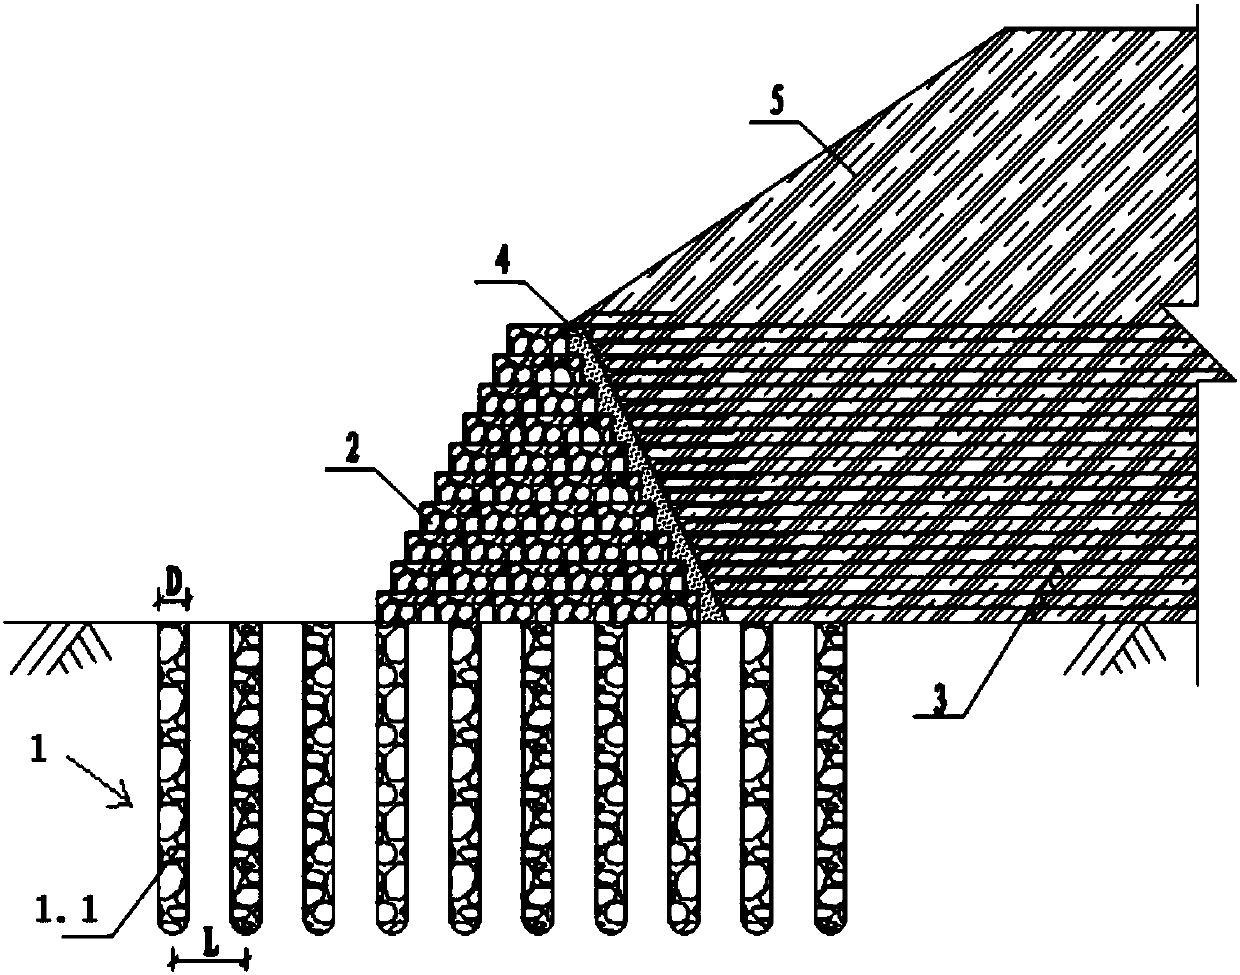 Retaining wall structure with composite foundation and reinforced gabions and construction method